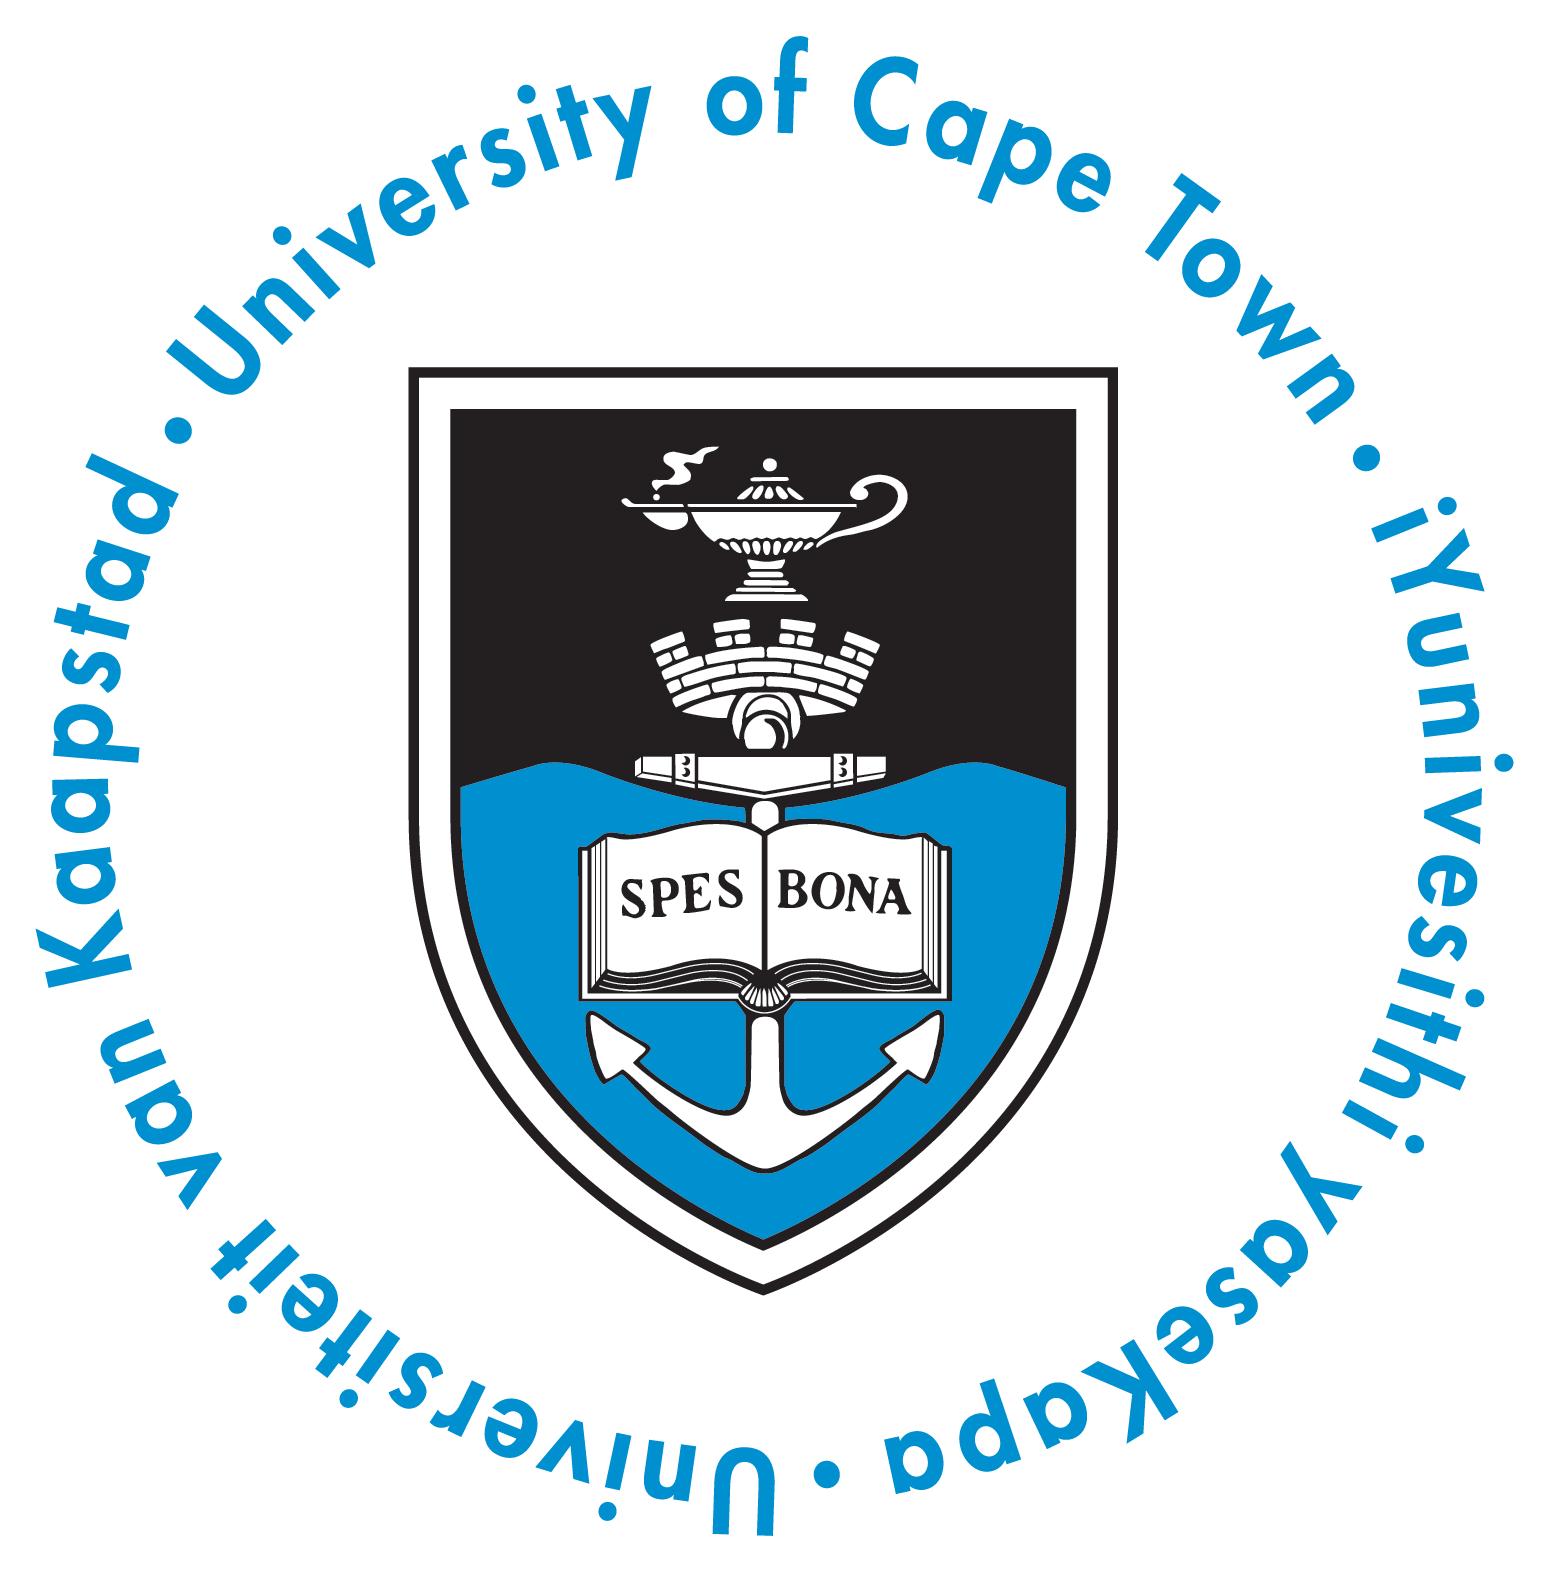 The University of Cape Town and its Department of Information Systems